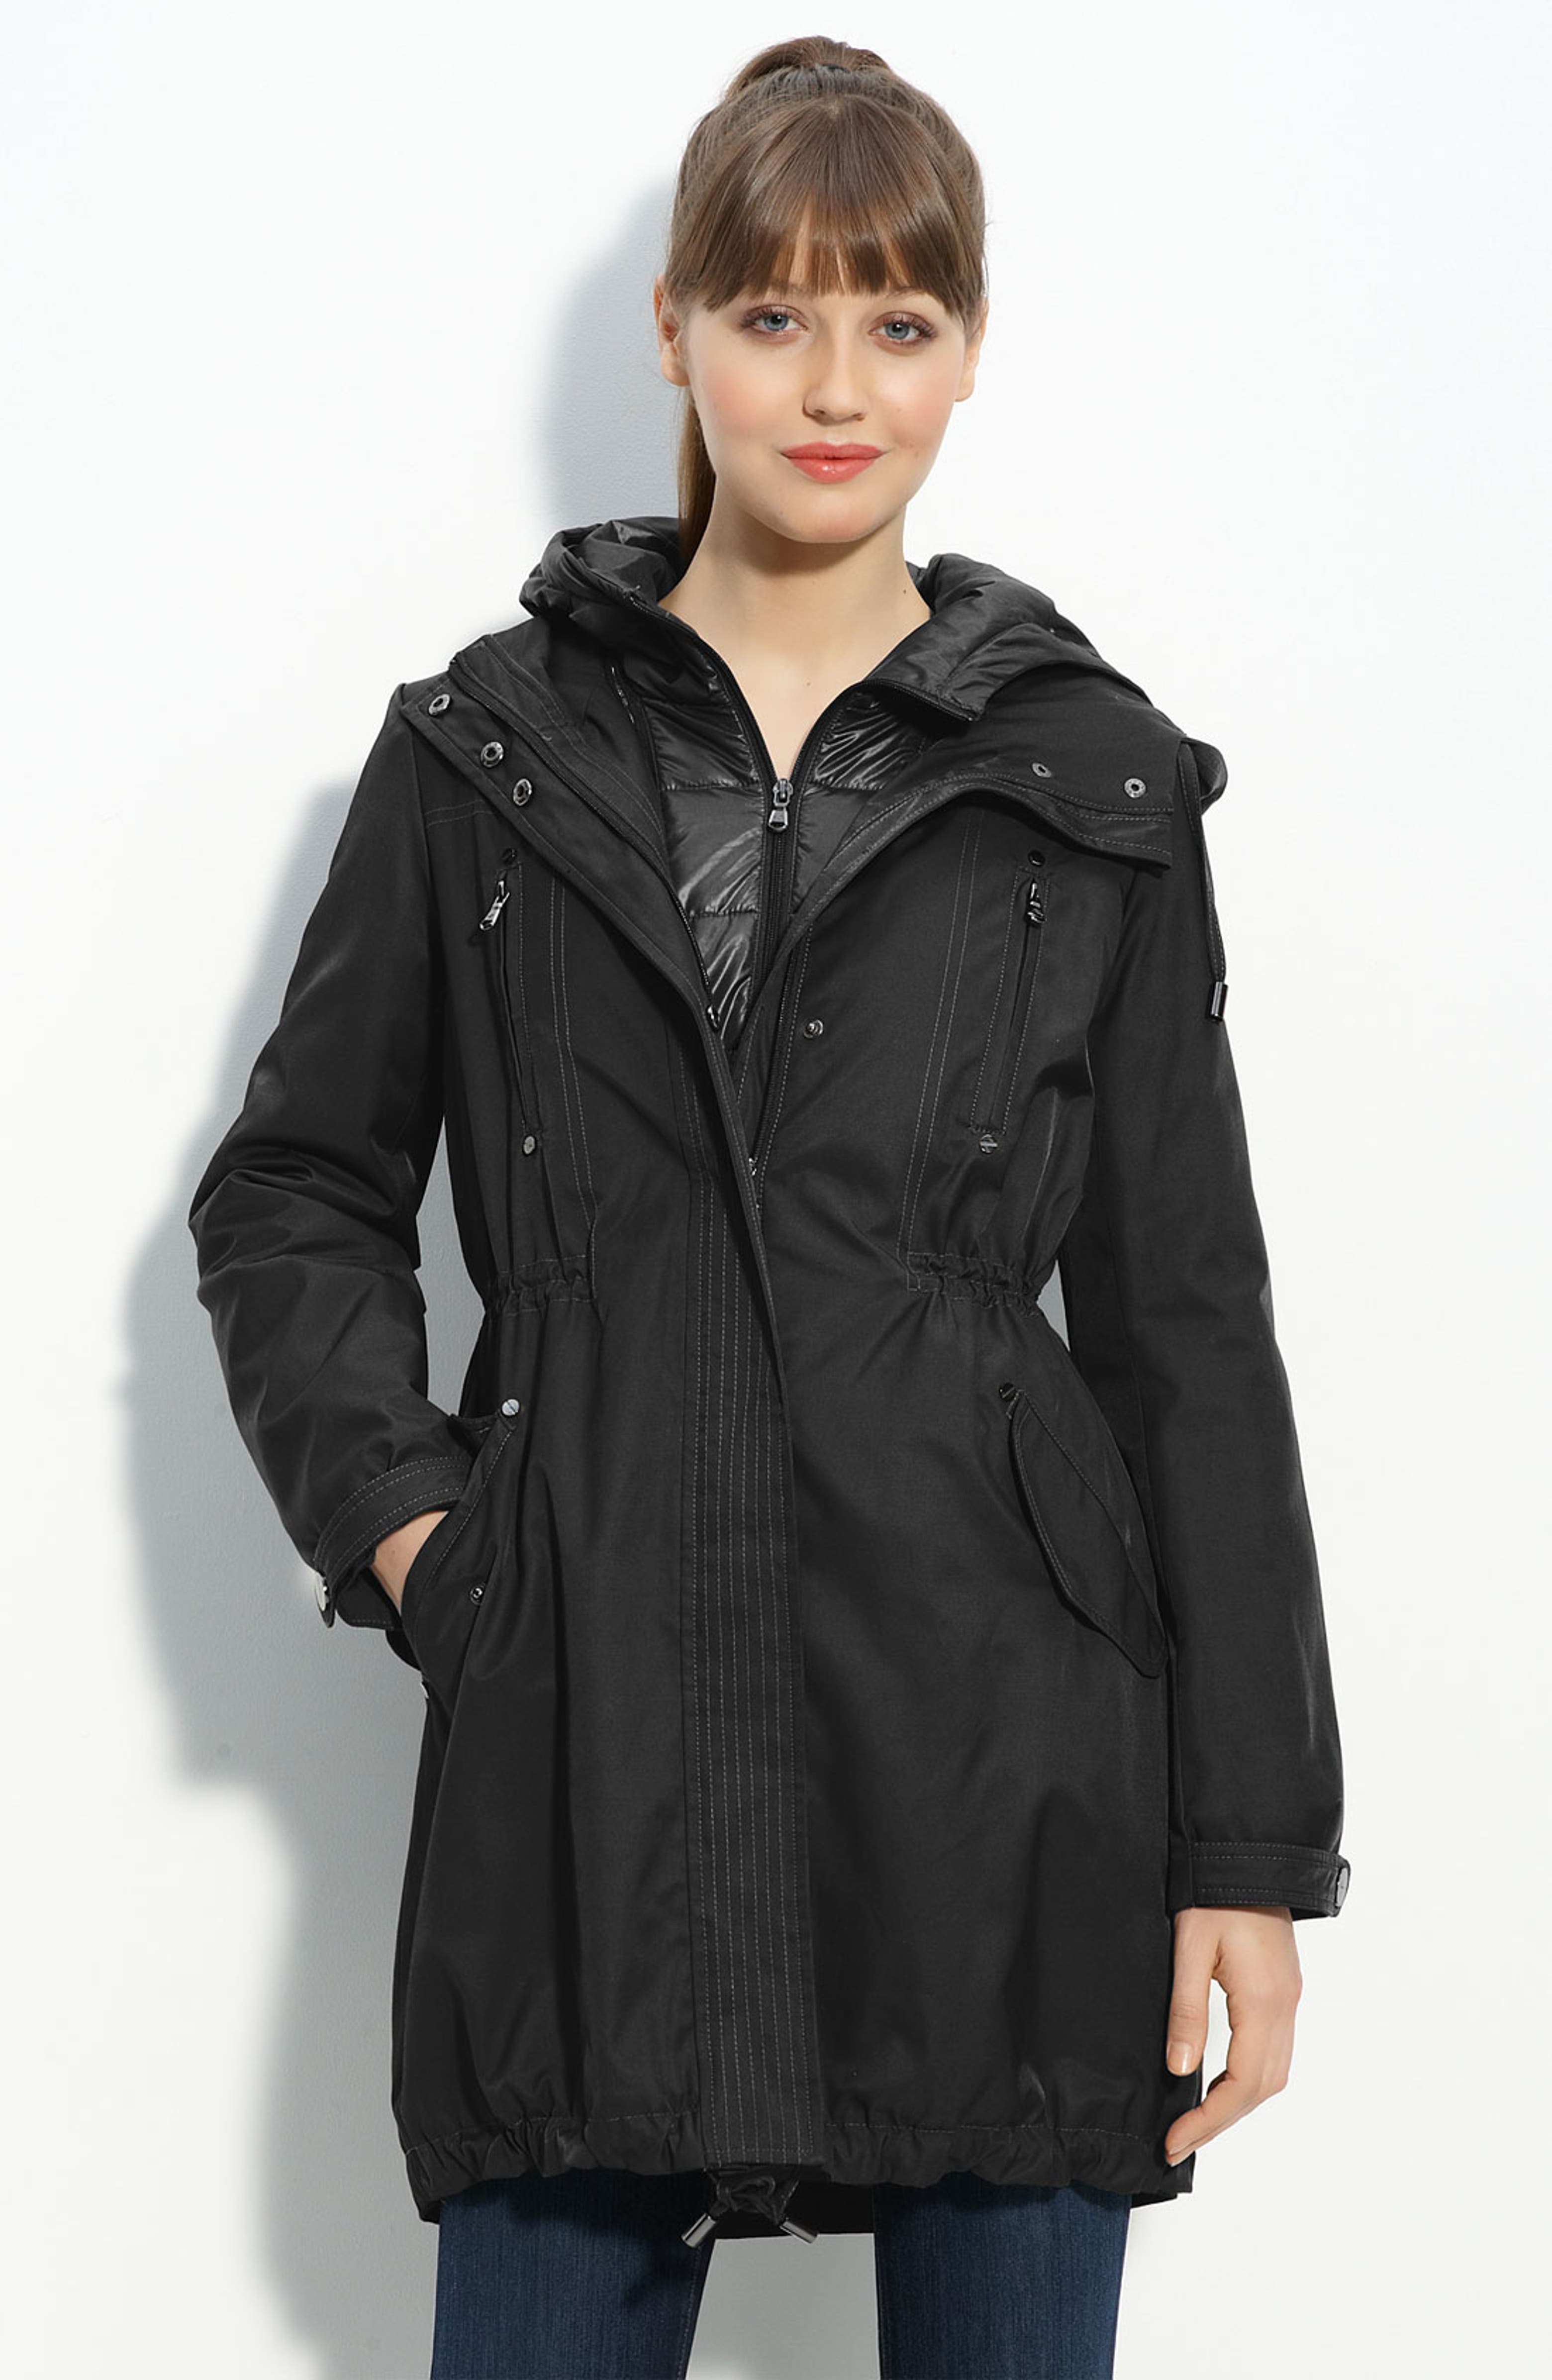 Kenneth Cole New York 'Oxford' Anorak with Quilted Inset | Nordstrom